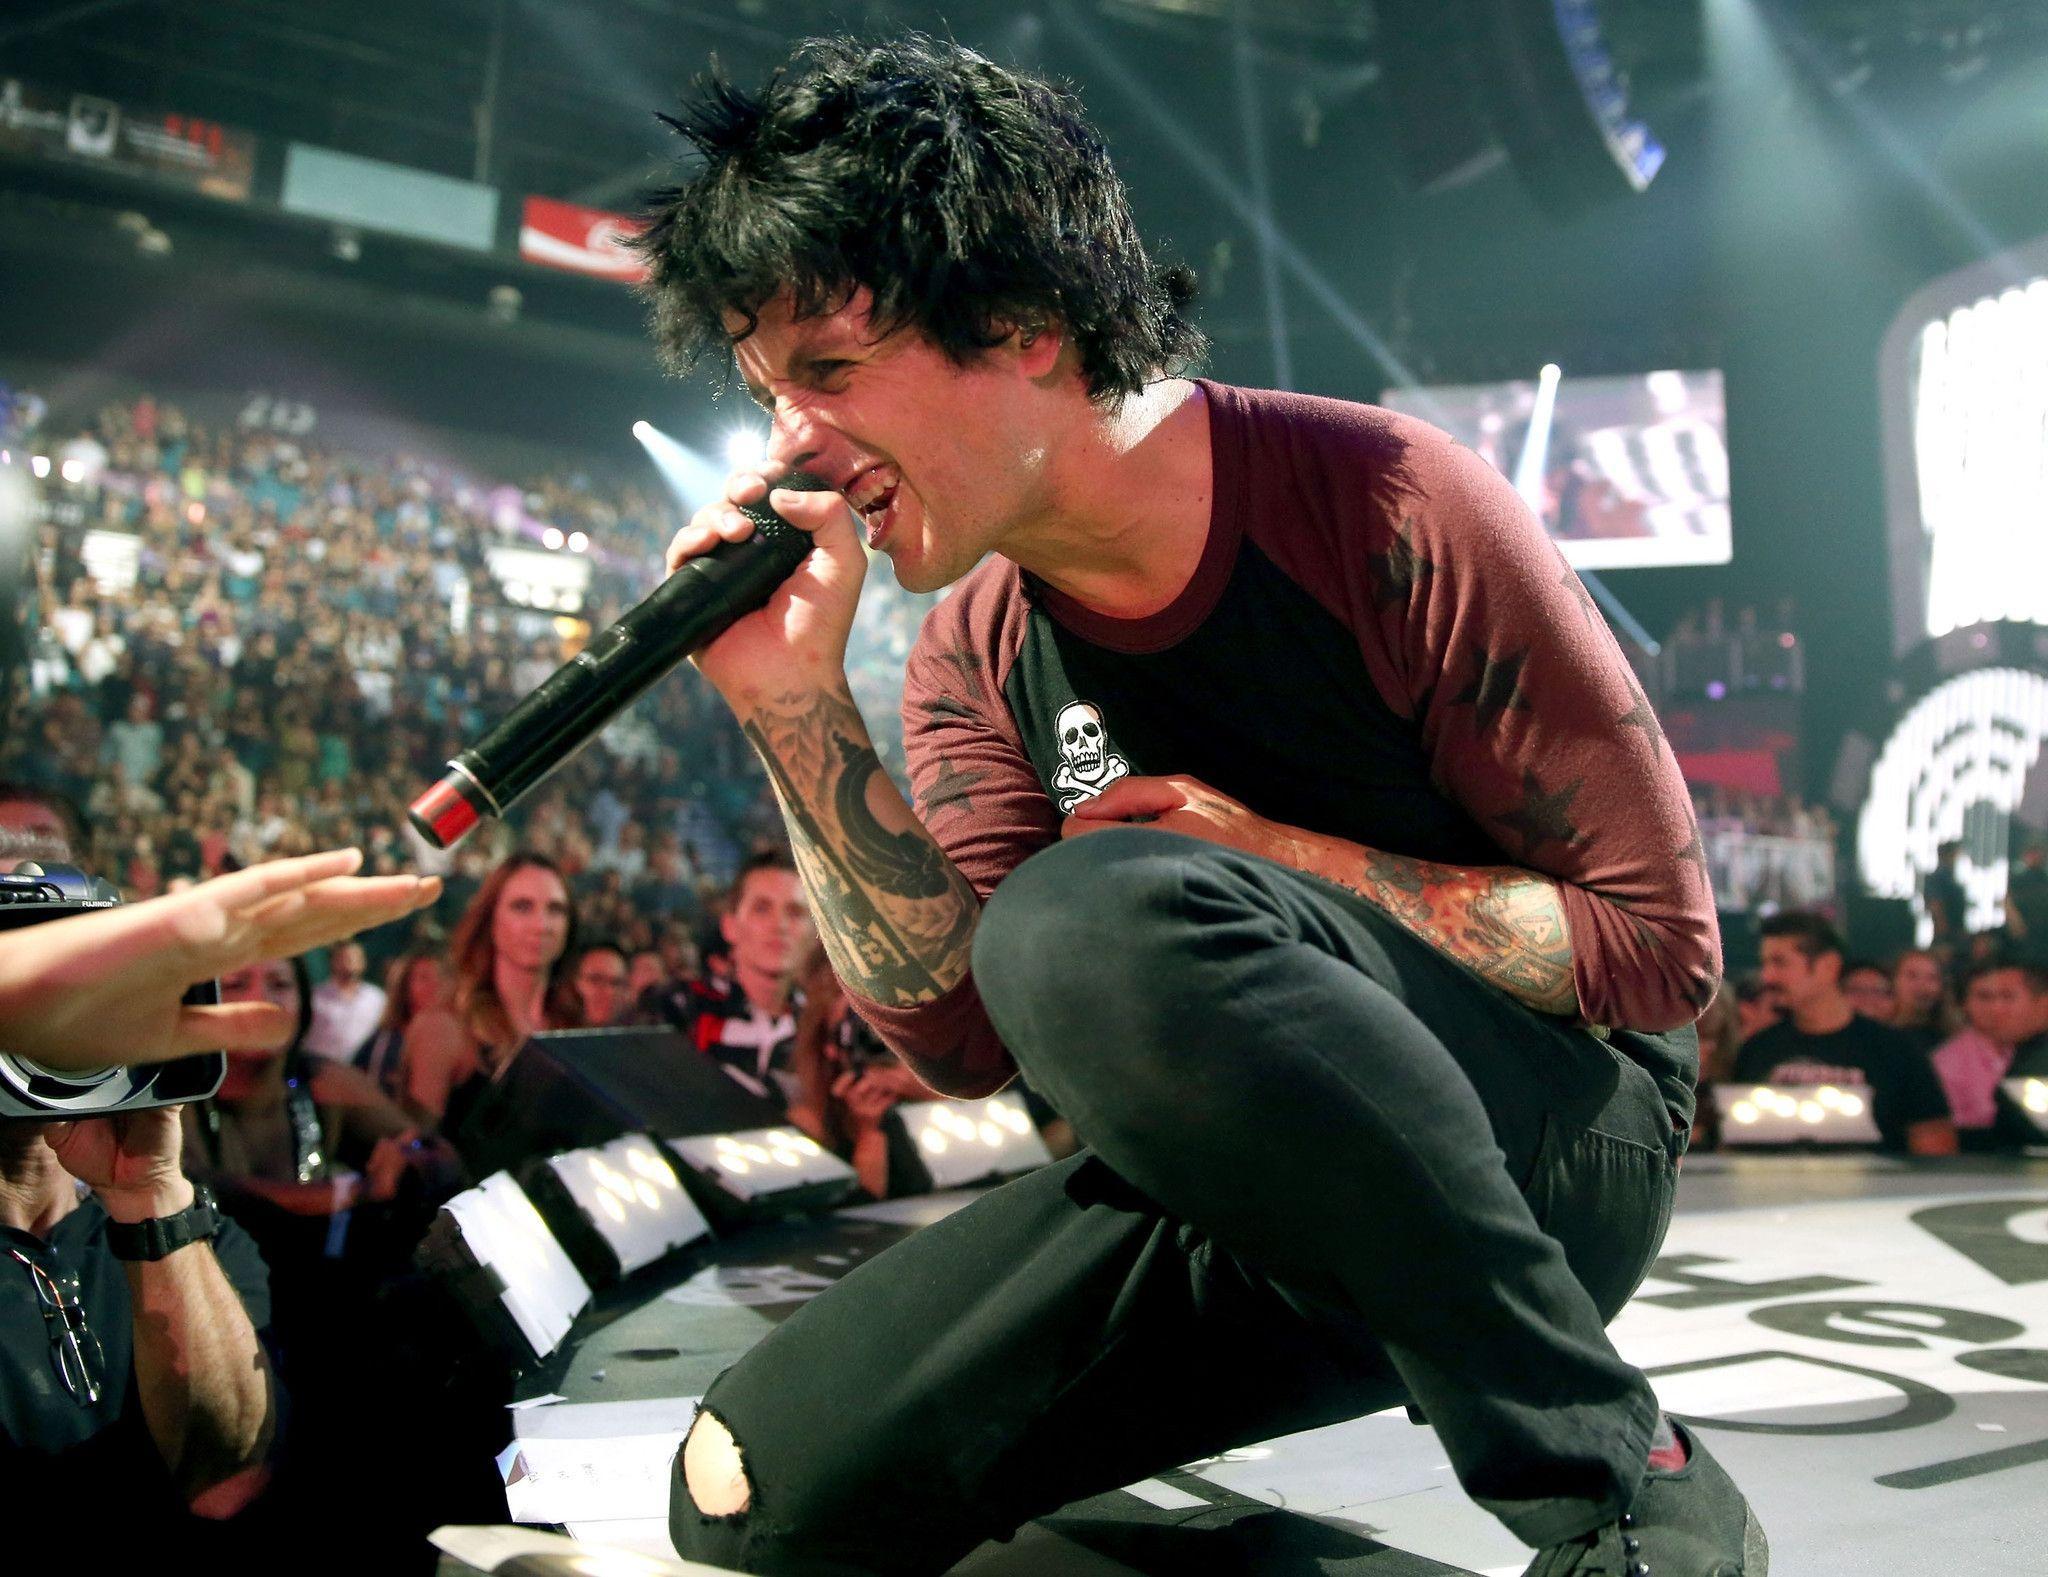 Billie Joe Armstrong Wallpaper Image Photo Picture Background